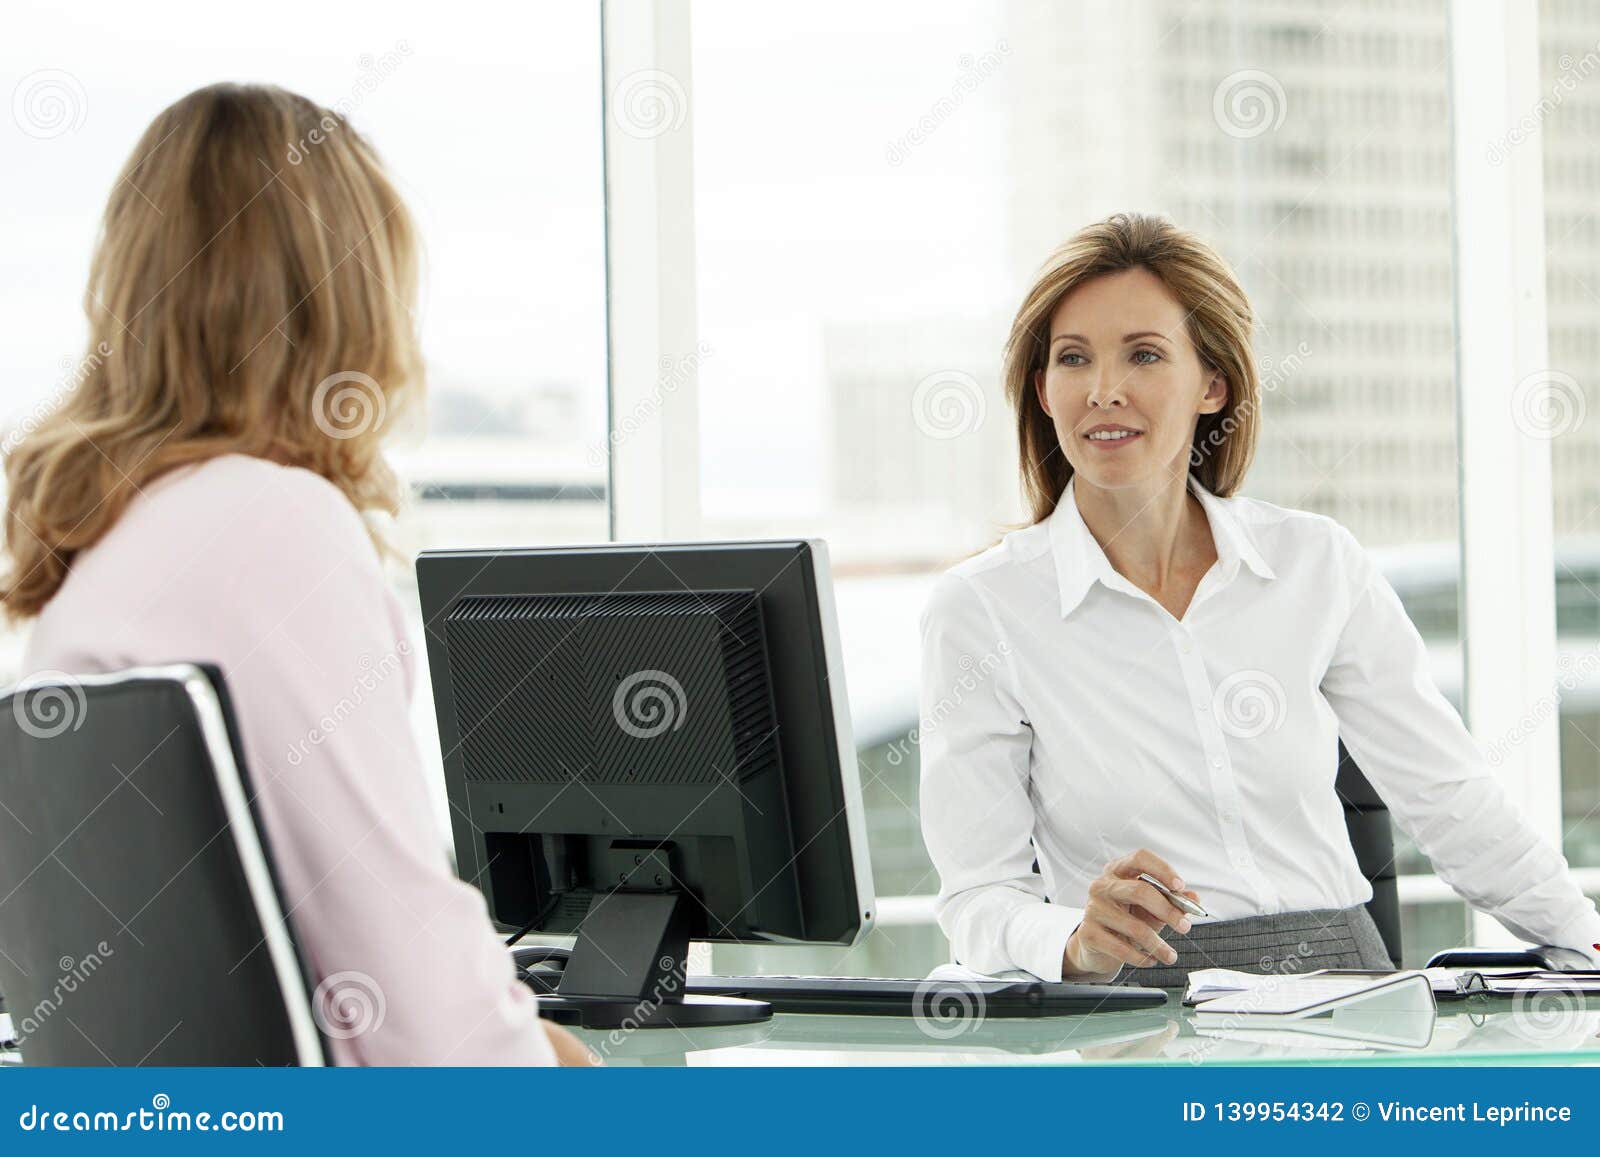 corporate business job interview with executive woman